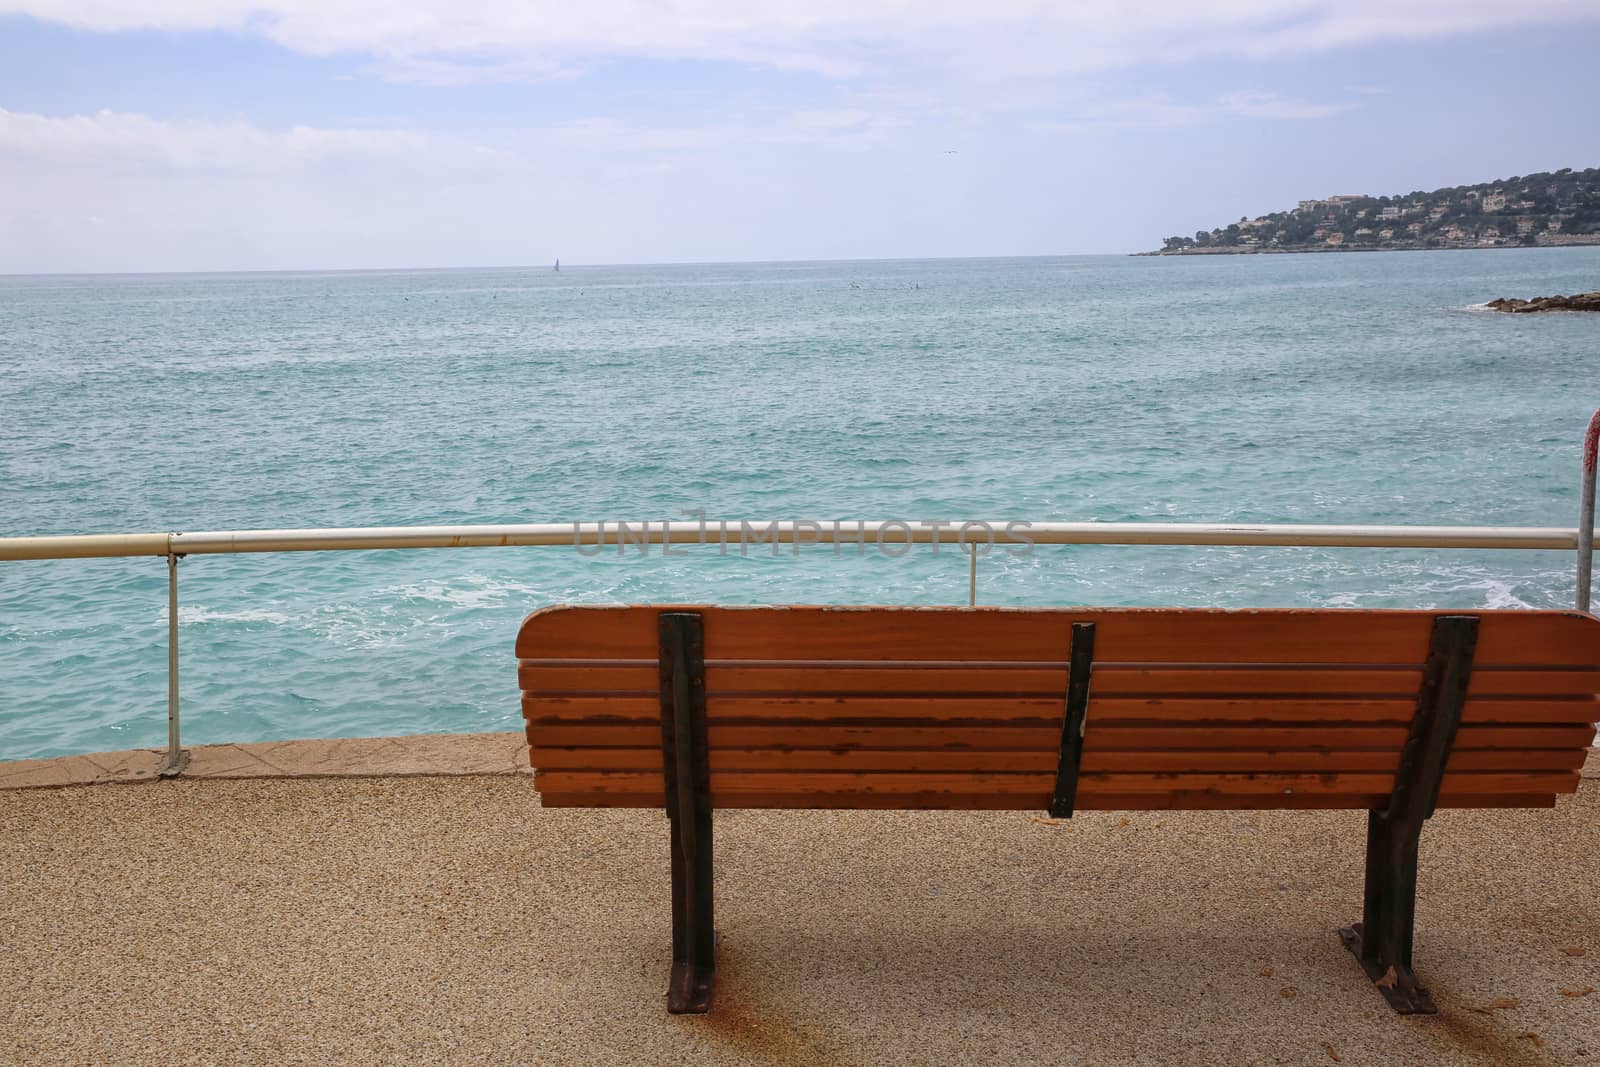 Bench With a View Over Mediterranean Sea at Roquebrune-Cap-Martin in France